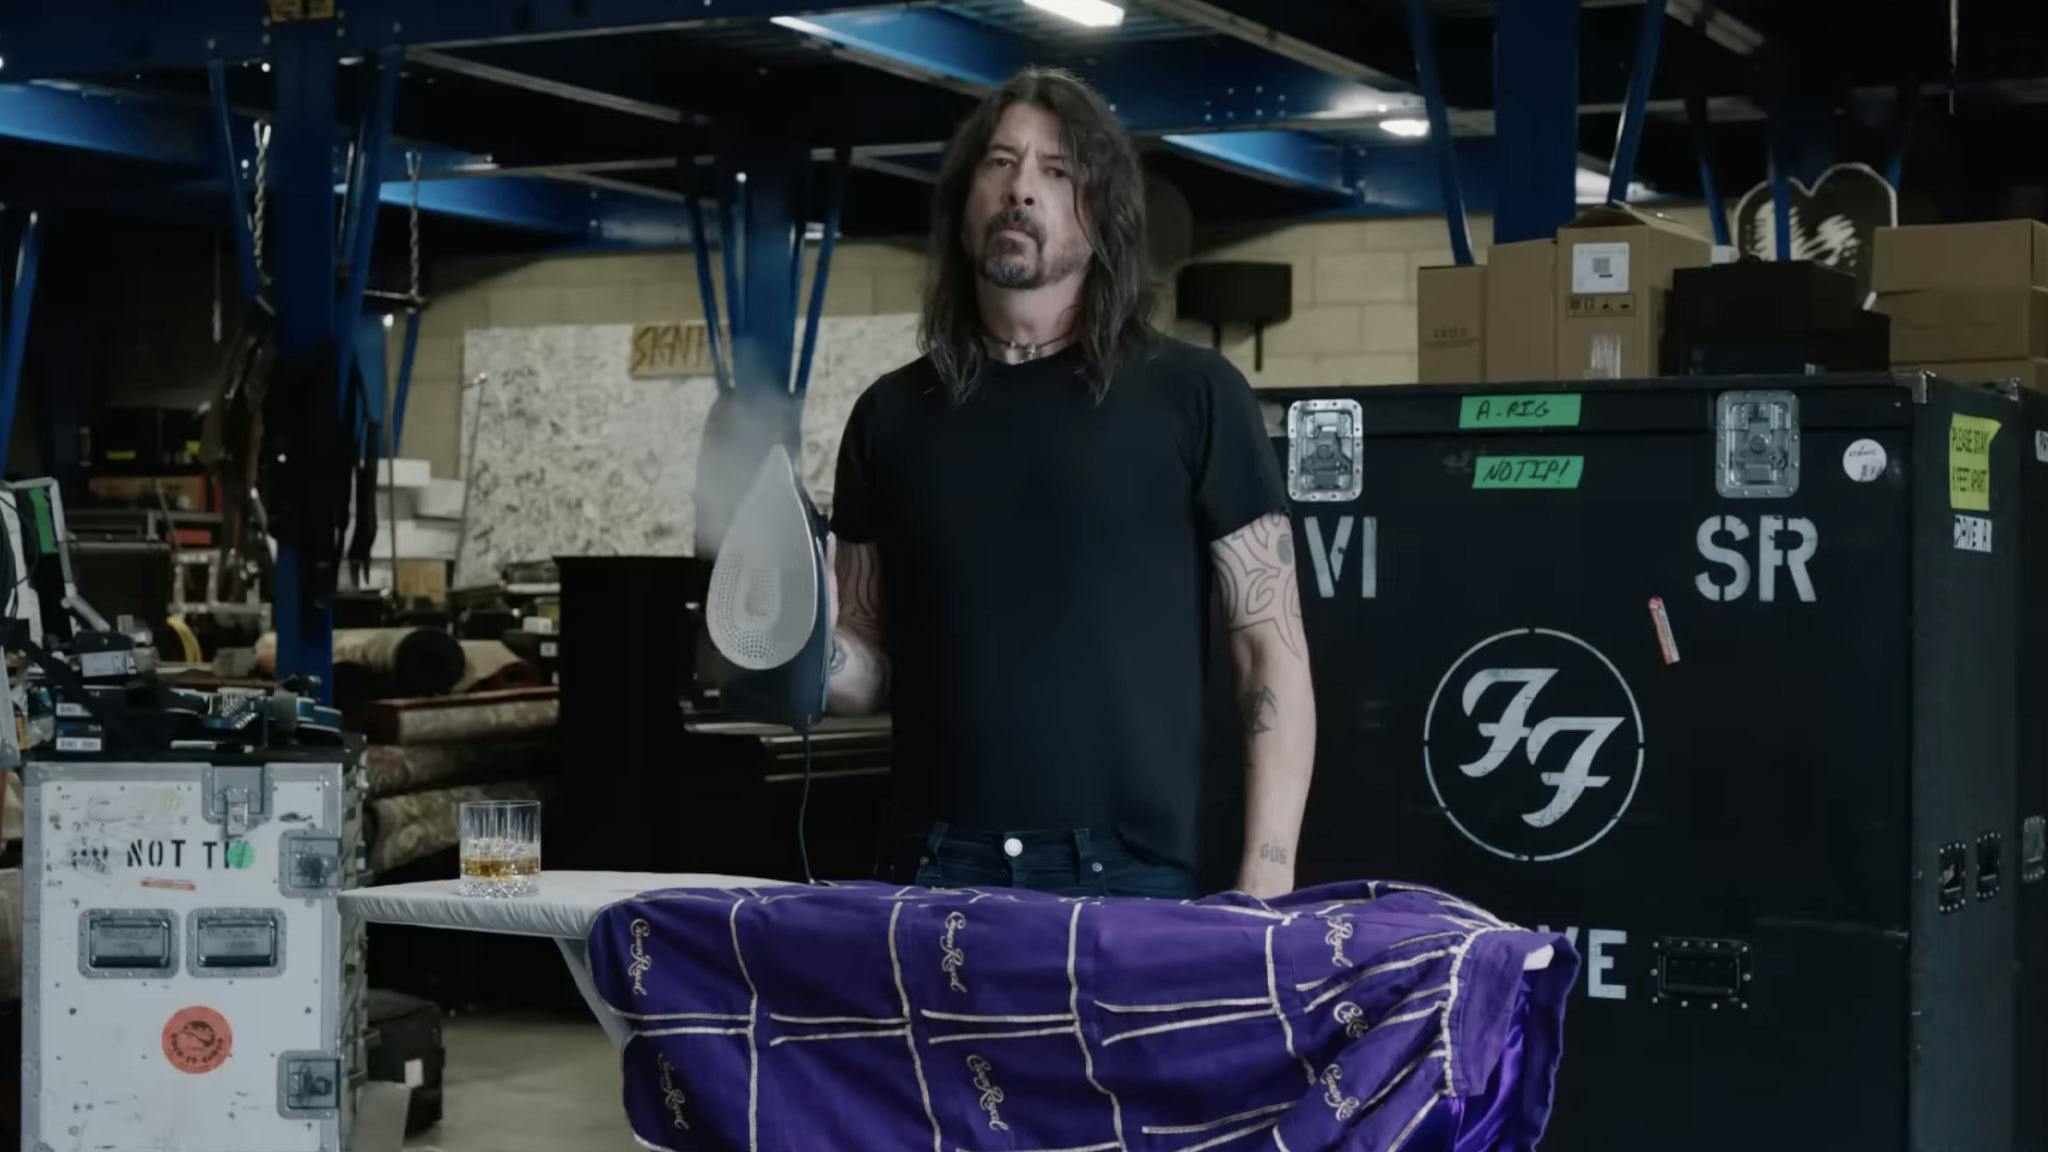 Watch Dave Grohl’s Super Bowl LVII ad for Crown Royal